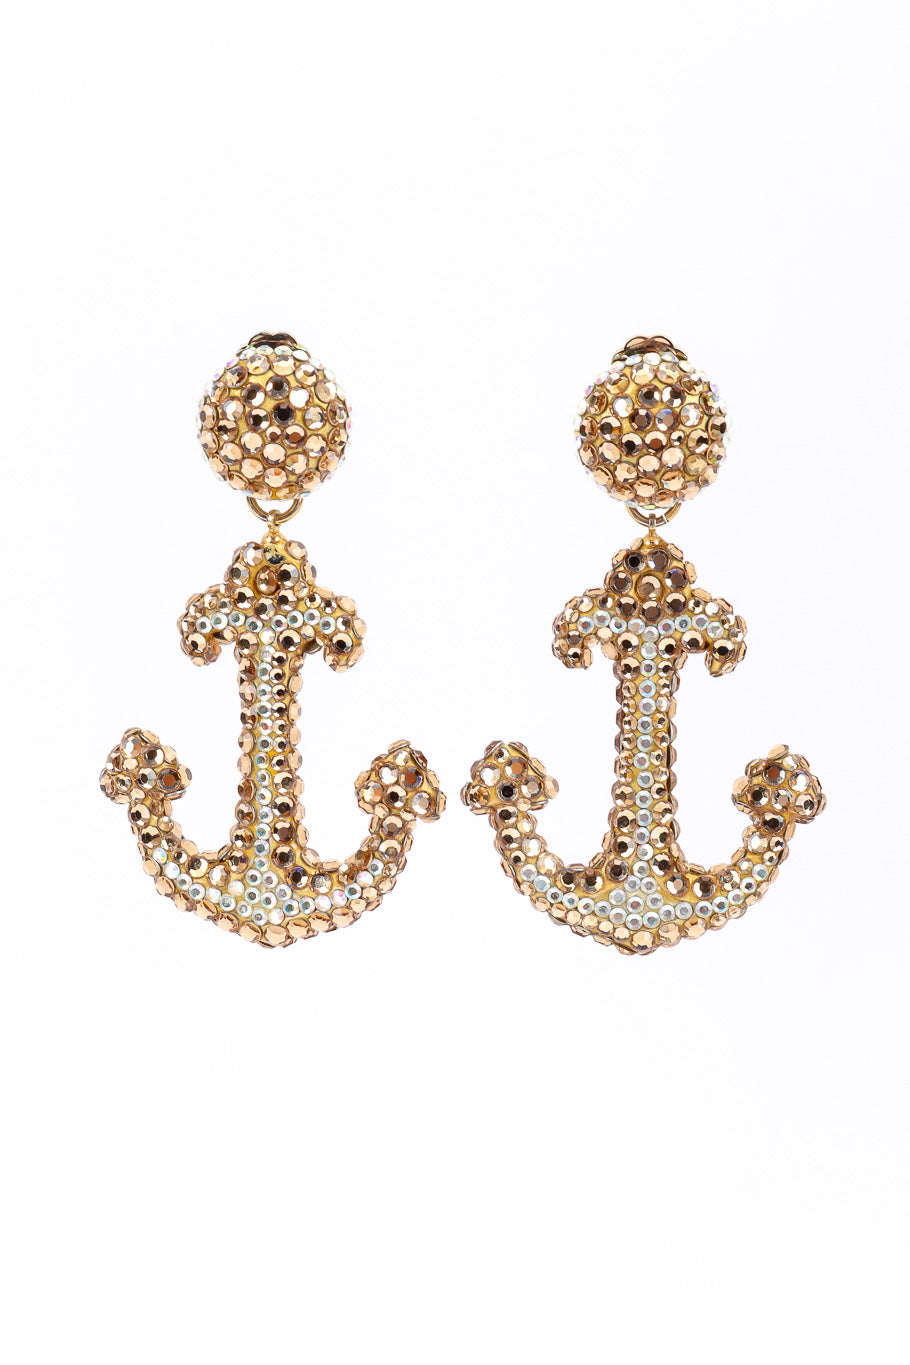 Vintage Richard Kerr Crystal Anchor Drop Earrings front view on white background @Recessla